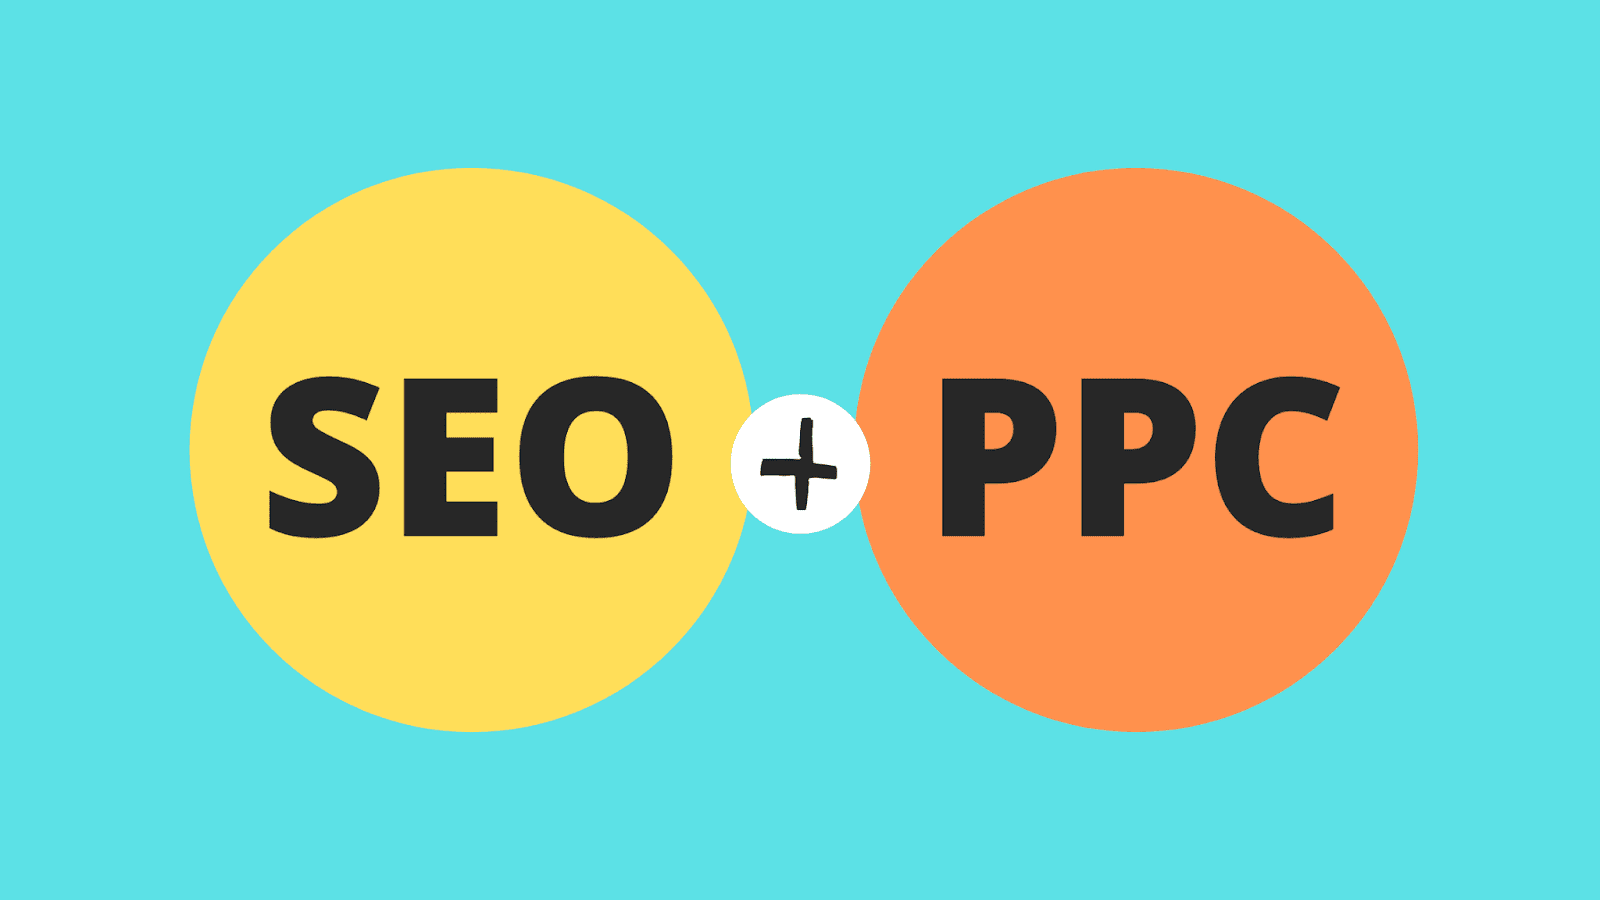 SEO & PPC logo - Aligning SEO and PPC eCommerce Goals by Tillison Consulting